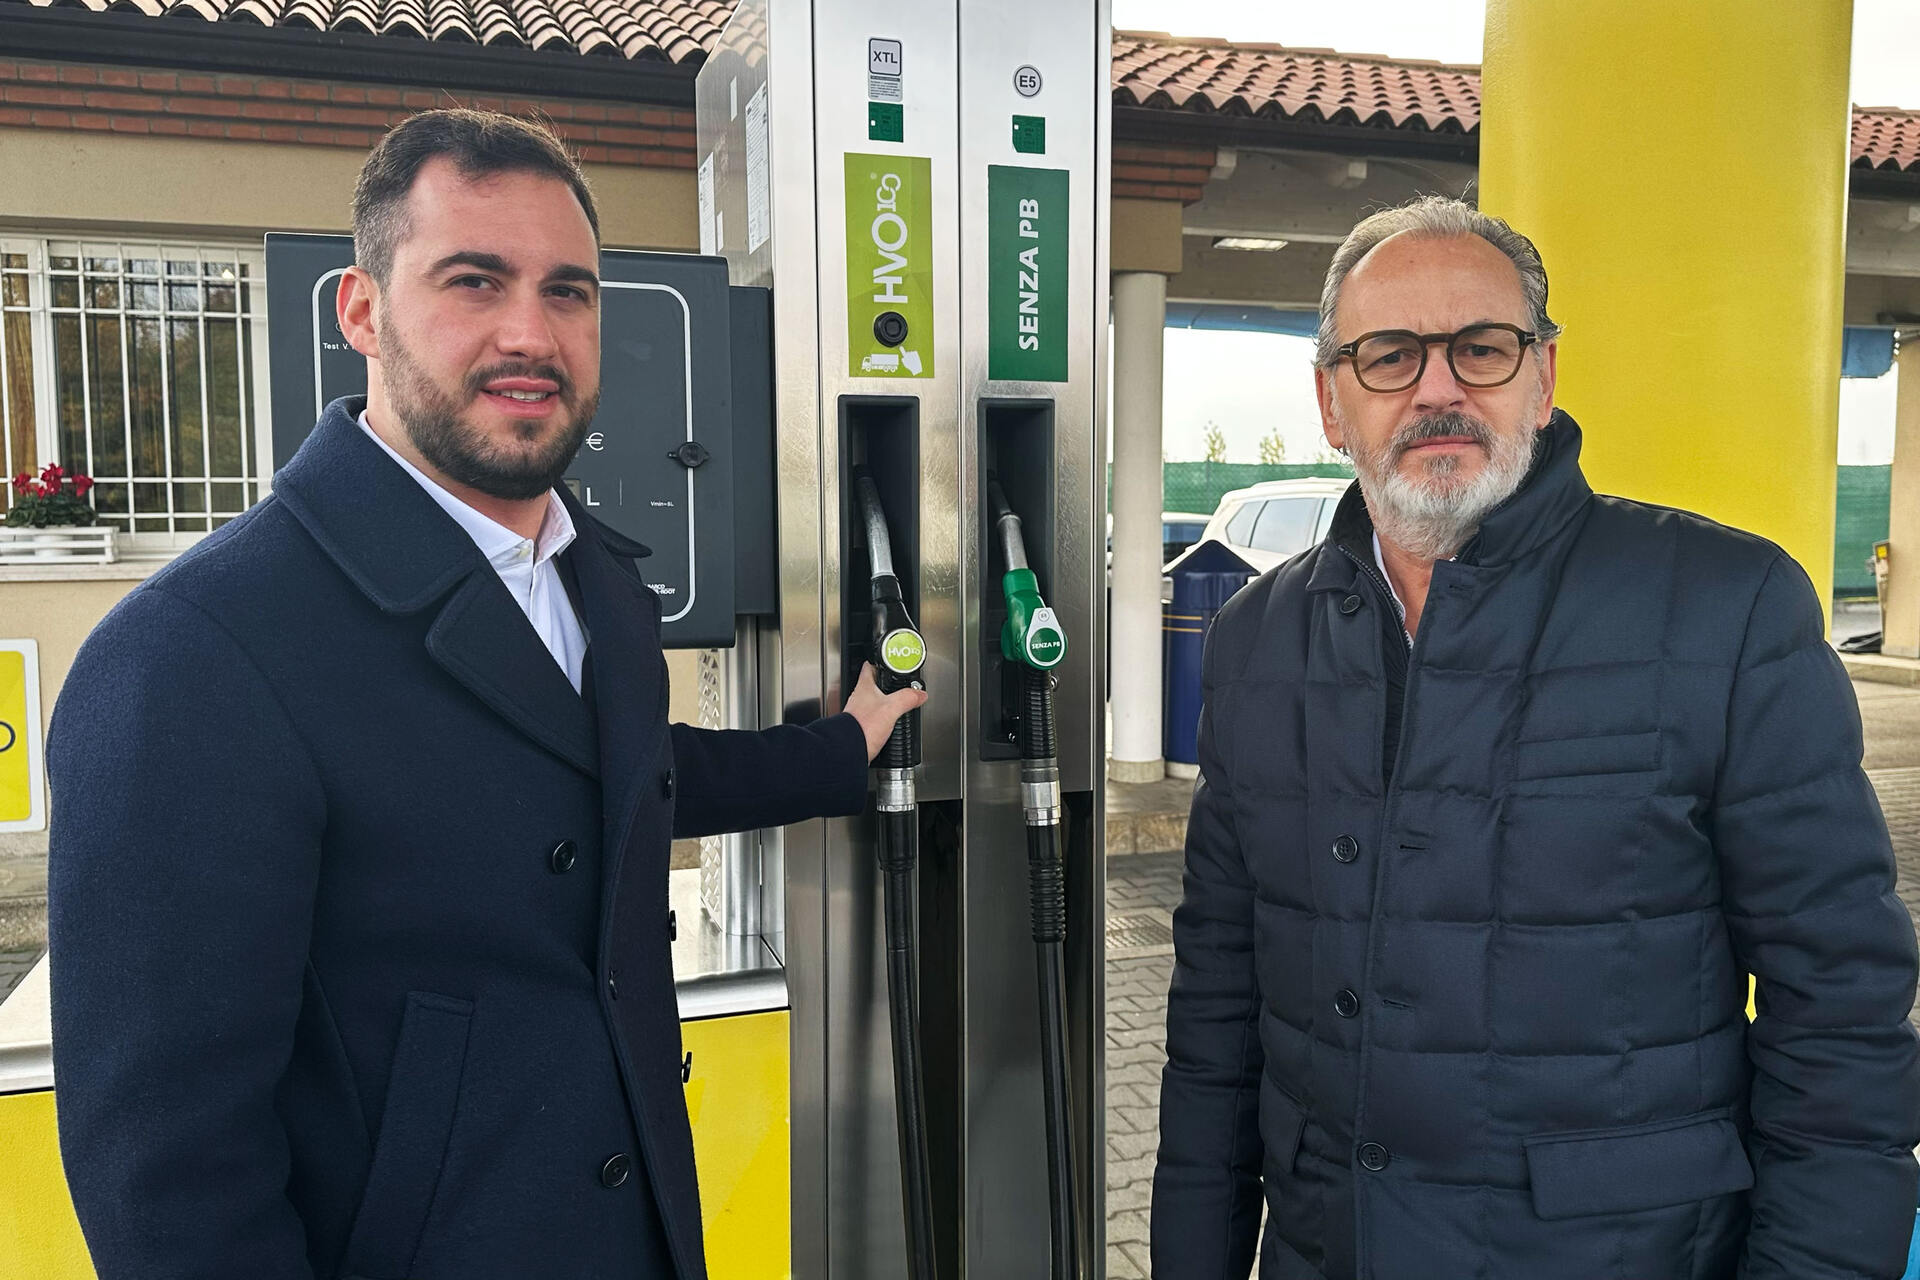 Biodiesel: Nicola Cavatton and Luca Cavatton are respectively CEO and Head of HVO100 of Costantin Spa